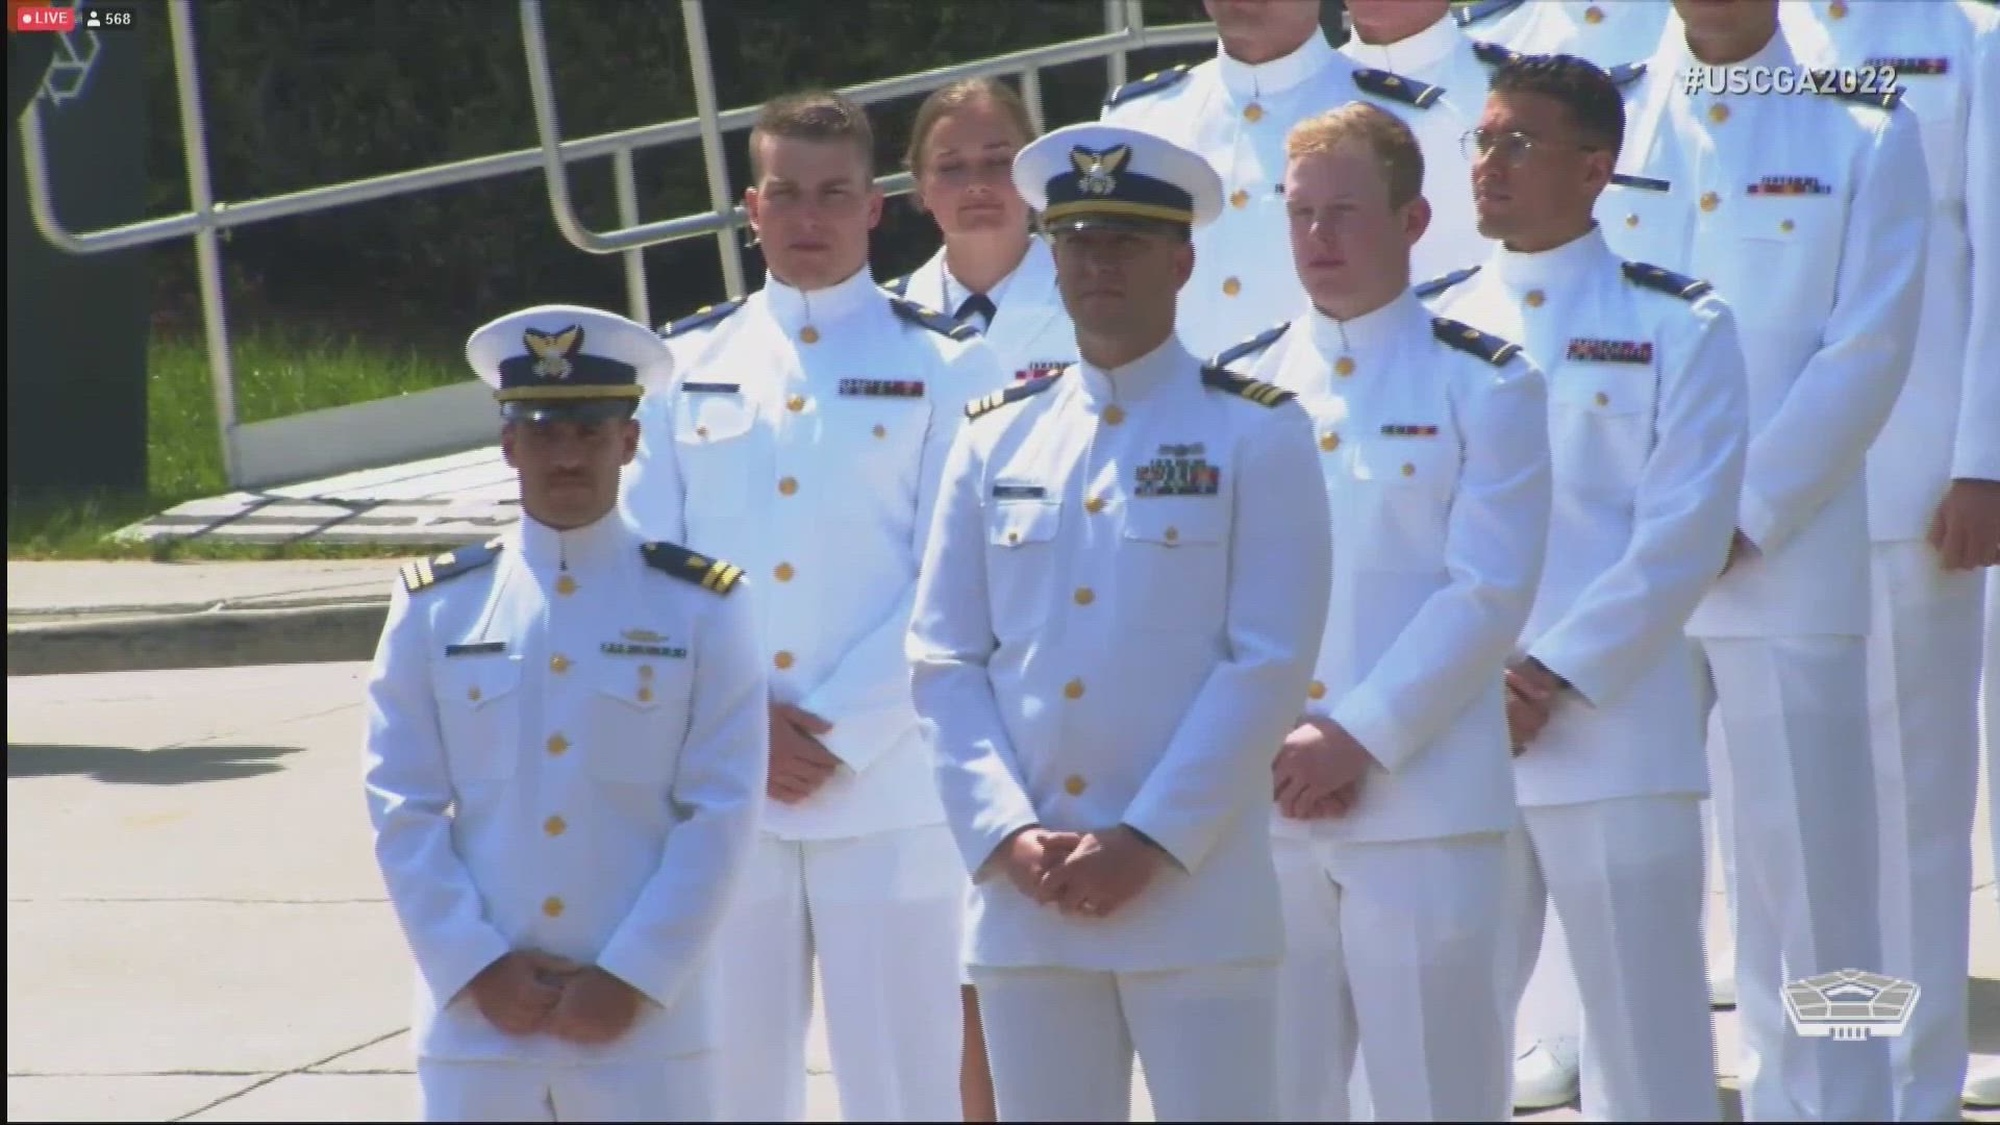 Vice President Kamala Harris delivers the keynote address at the U.S. Coast Guard Academy's 141st Commencement.